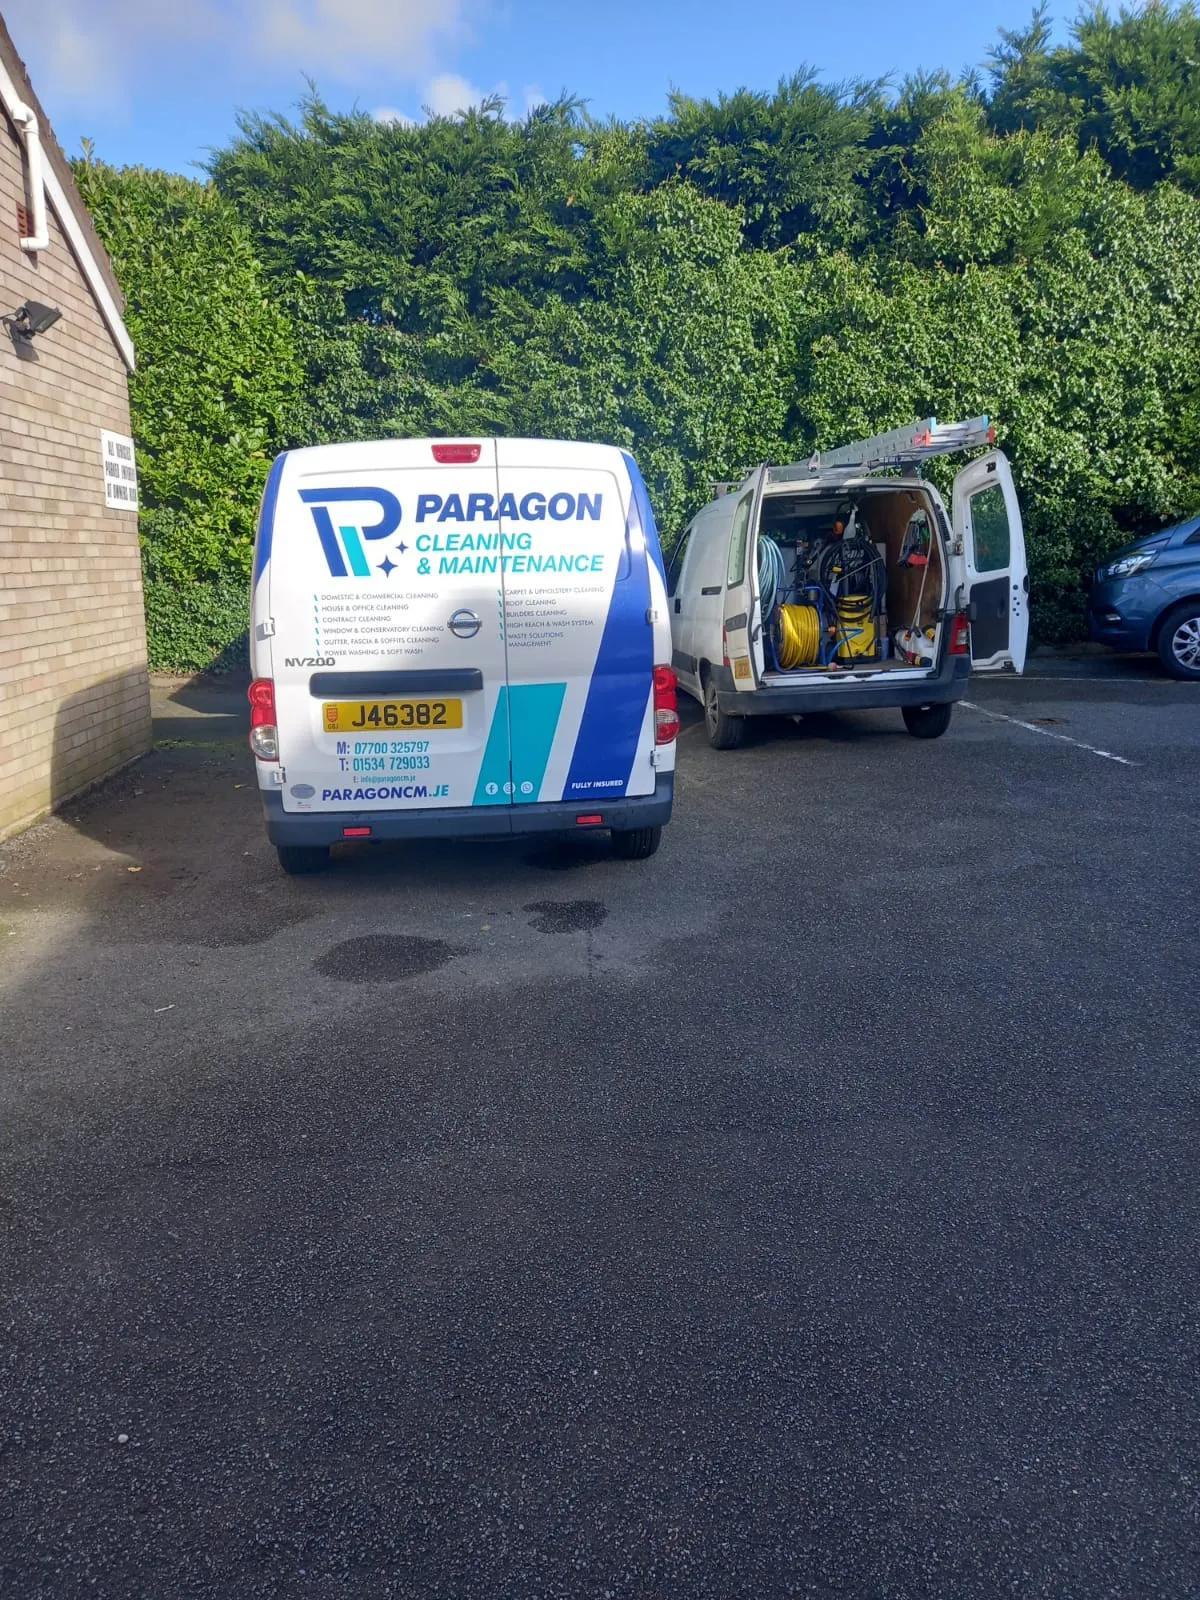 Our Paragon van on the streets of Jersey